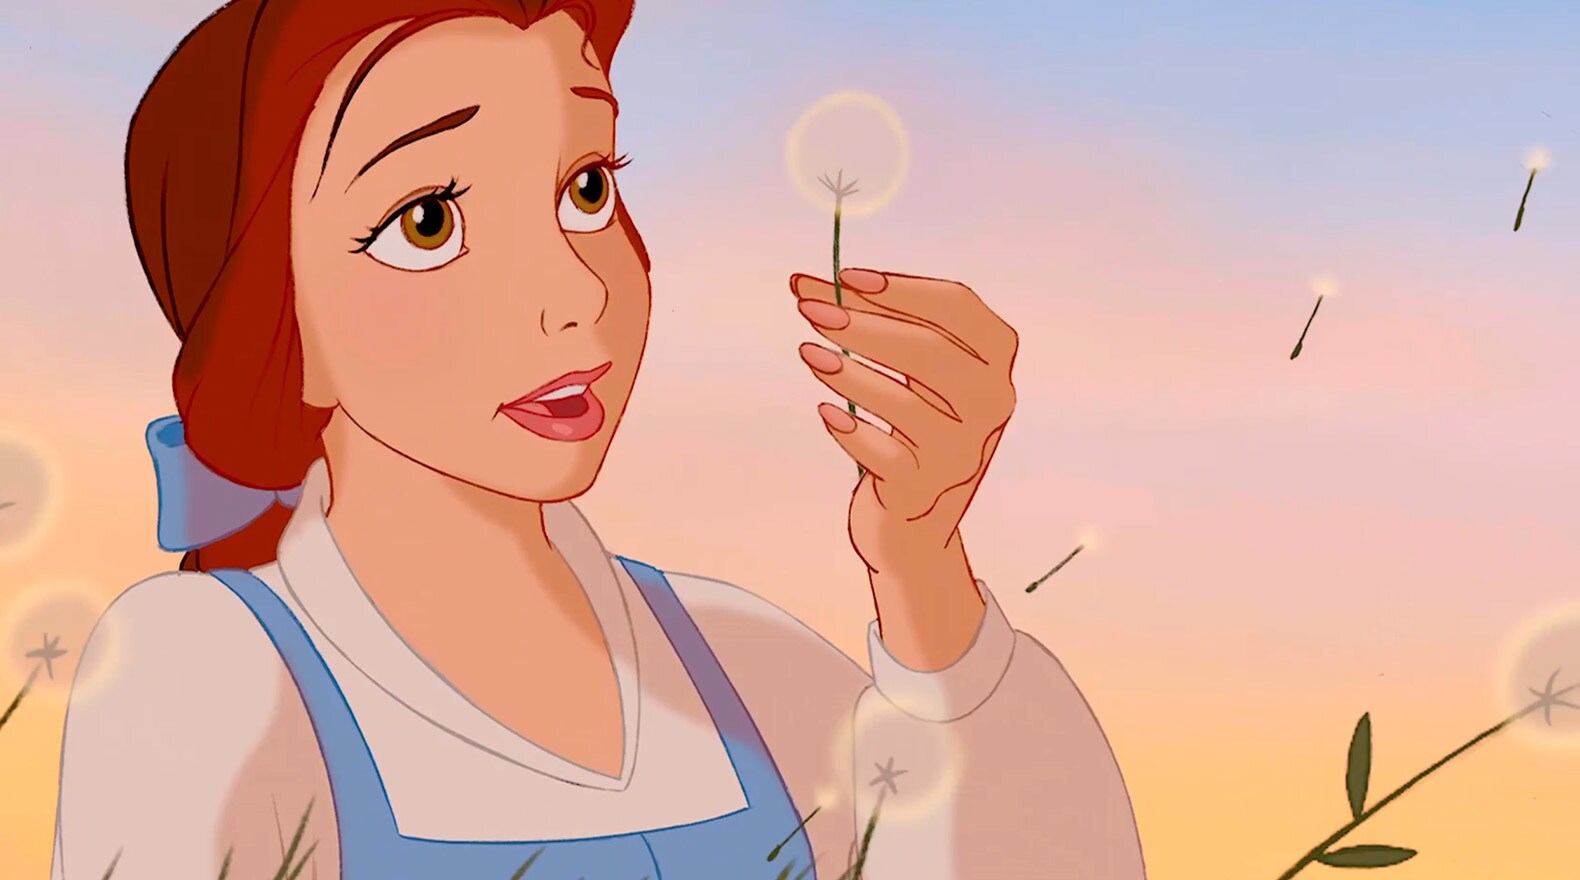 Belle wishes for adventure in the great wide somewhere